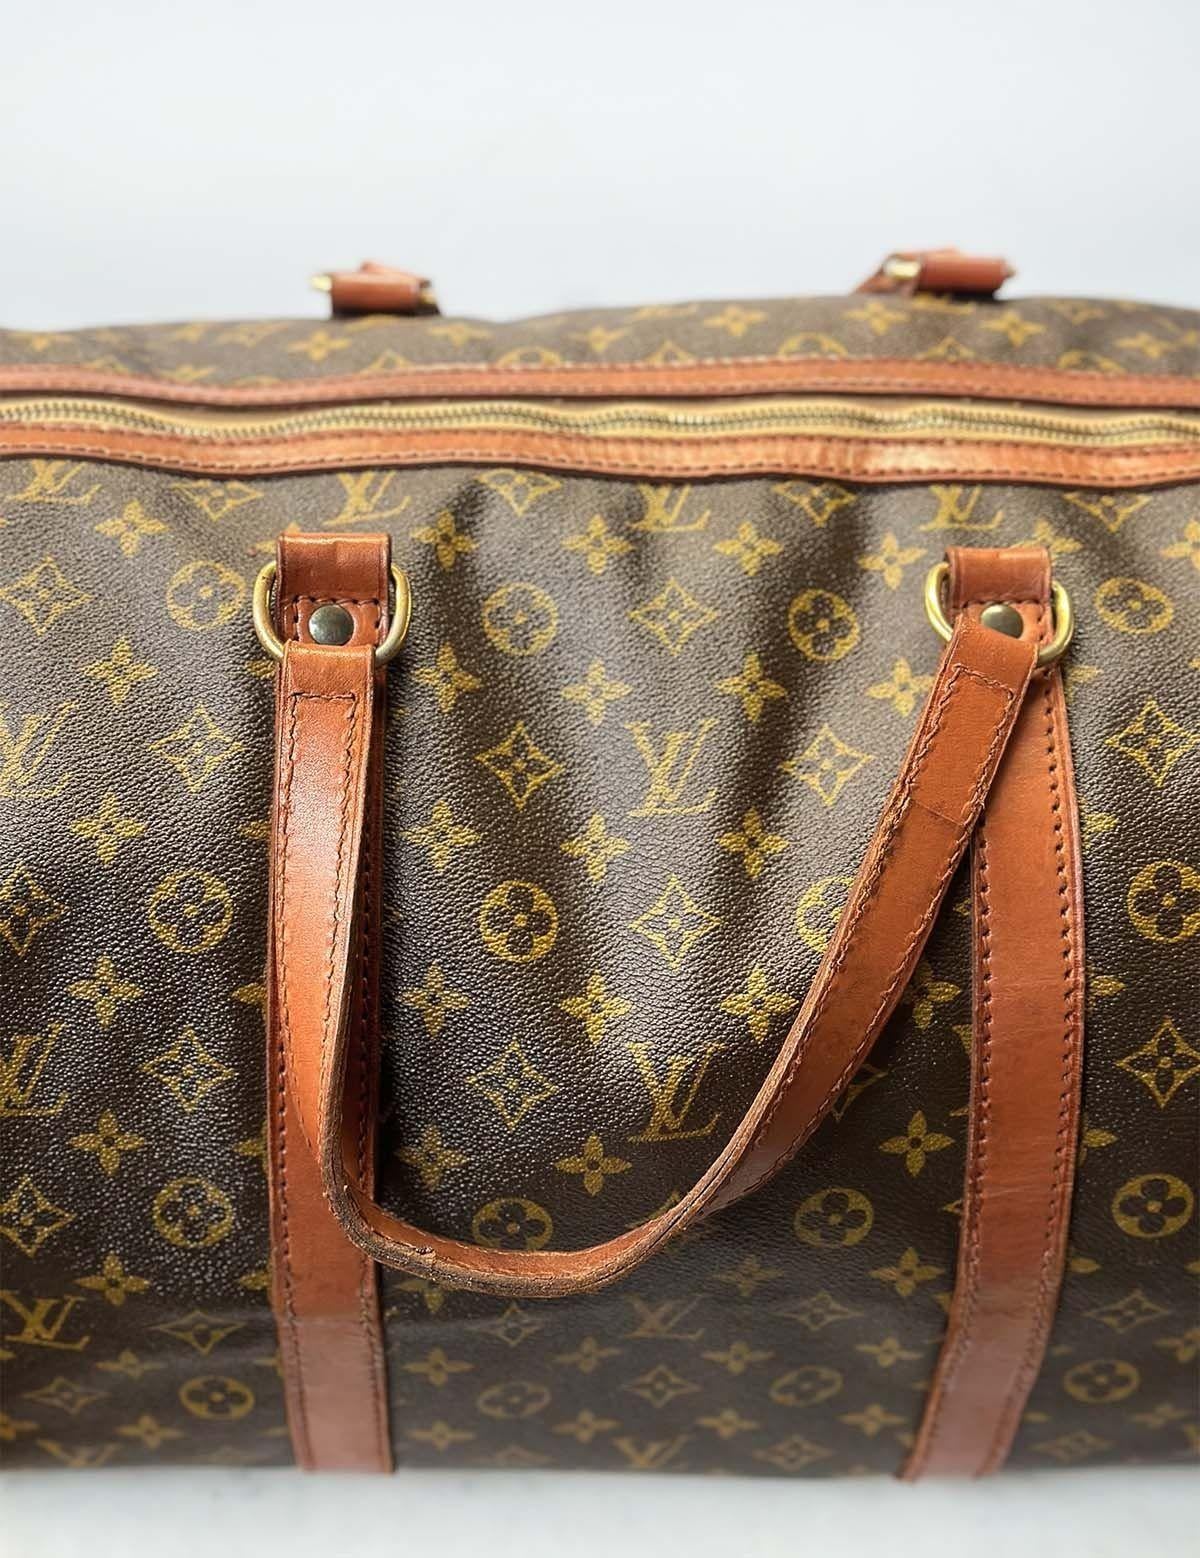 Vintage Louis Vuitton monogram luggage bag. The exterior of the bag is adorned with the renowned LV monogram pattern and vachetta leather details, finished with gold-tone brass hardware.
Dimensions:
19